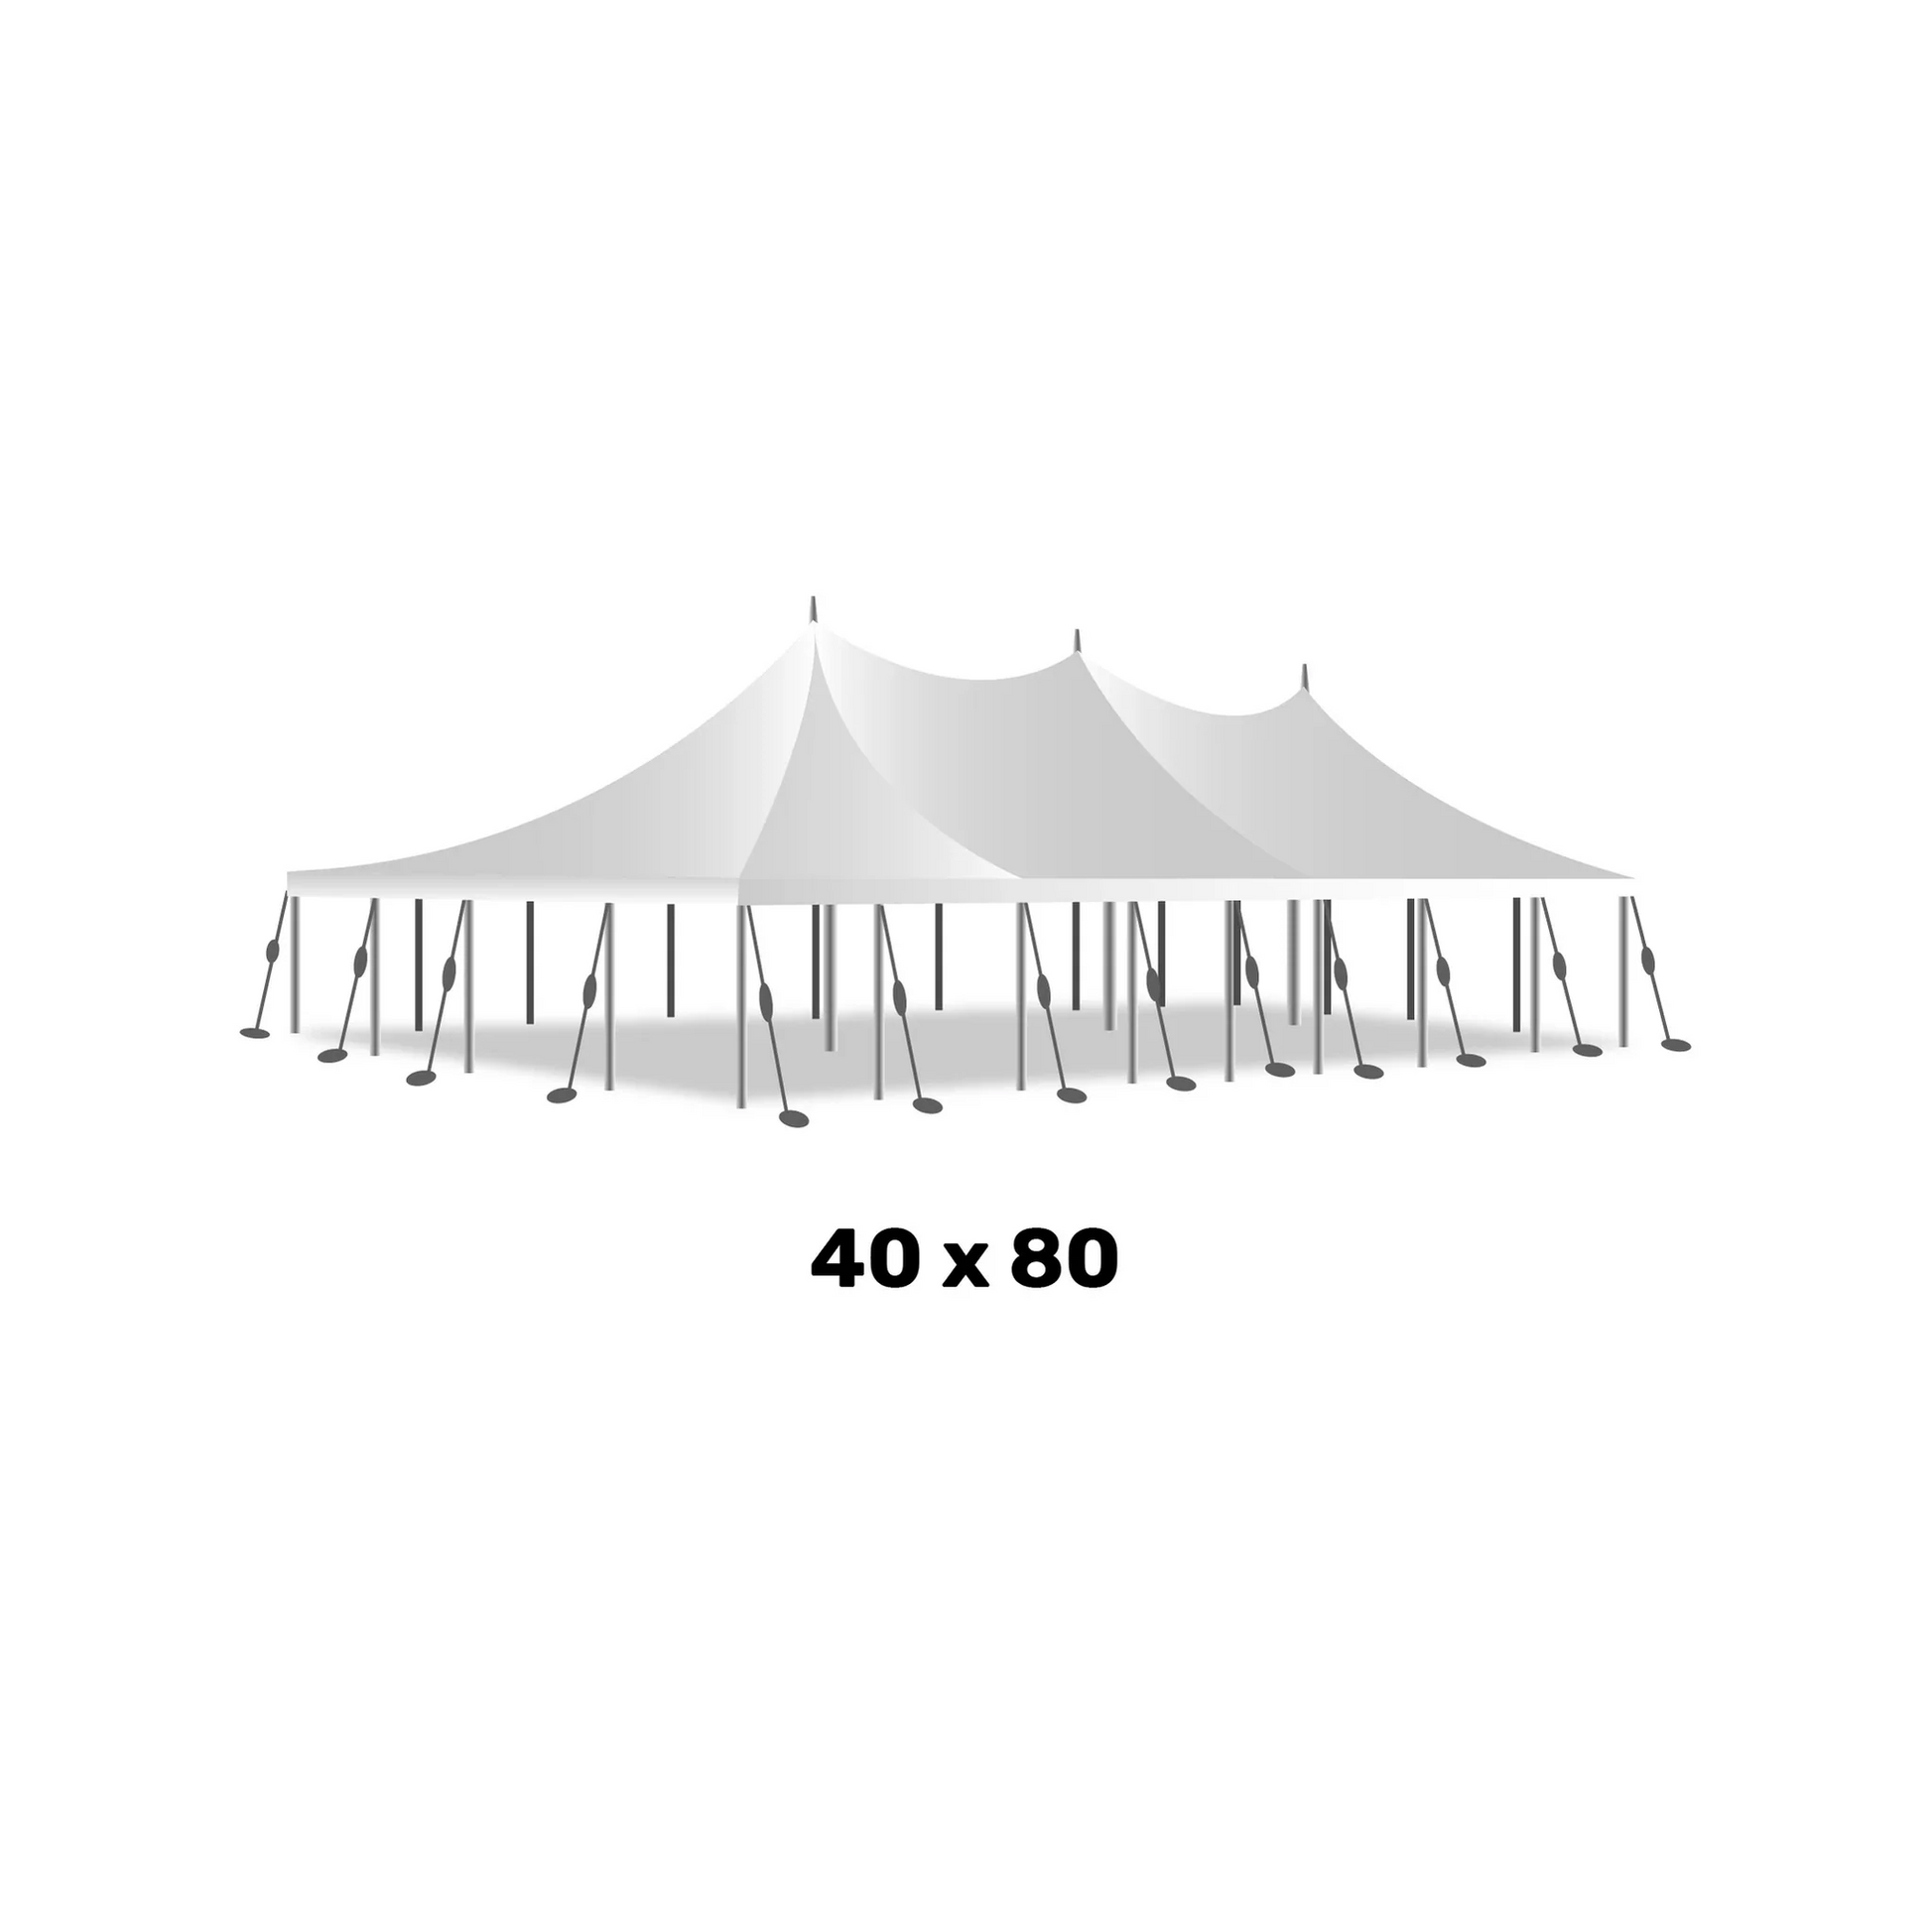 a 40 foot by 80 foot white marquee high peak pole tent